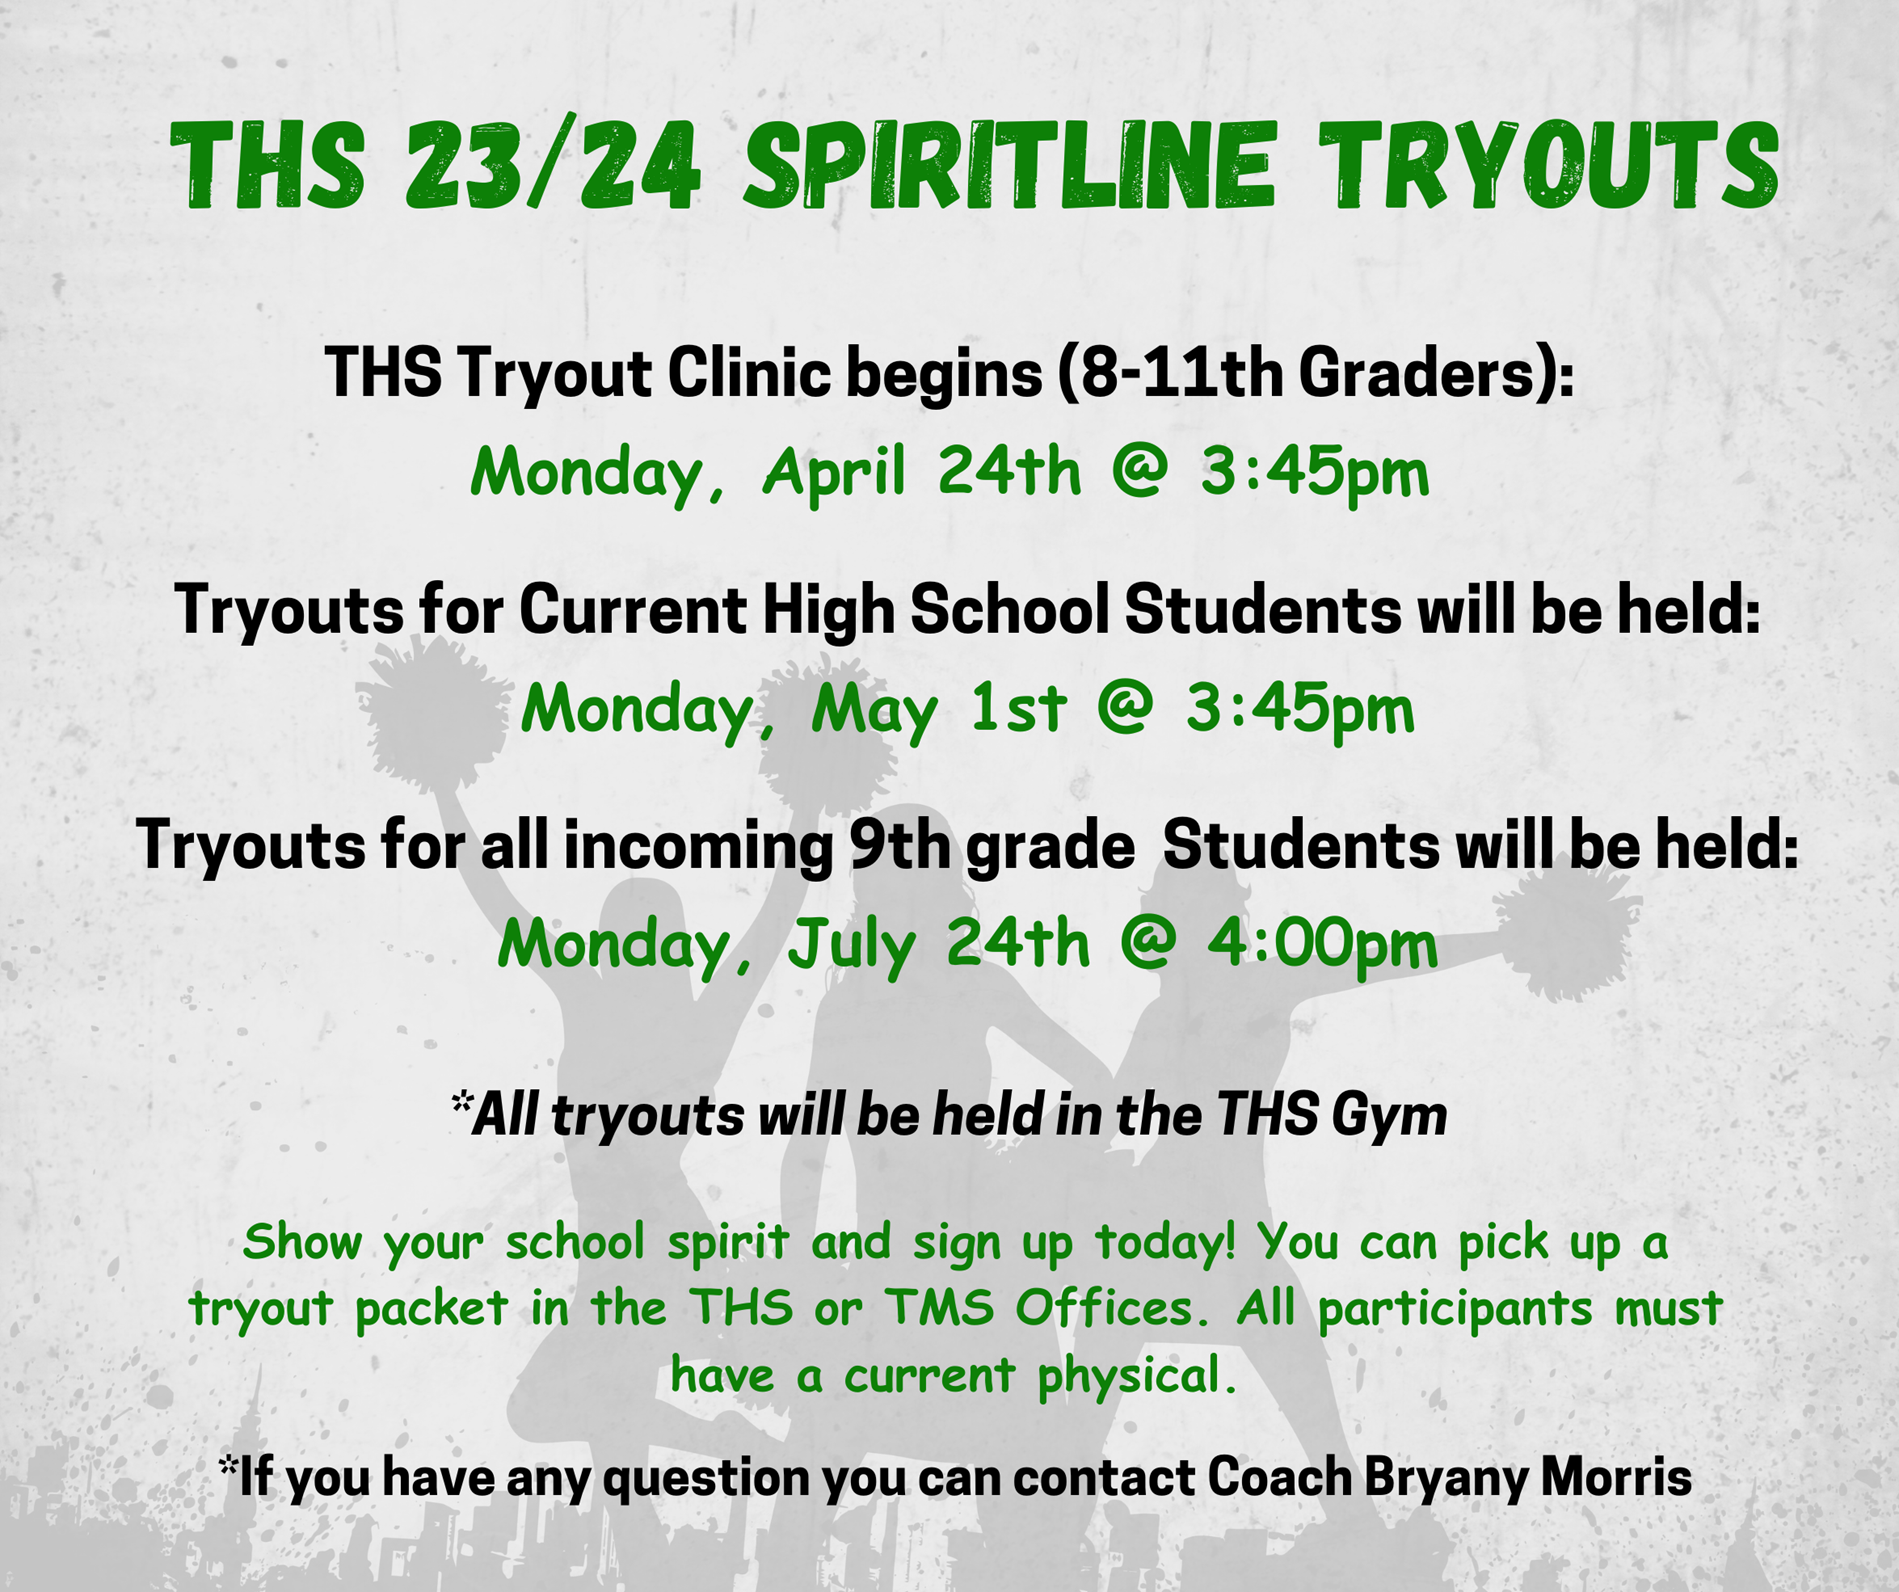 THS Spiritline Tryouts